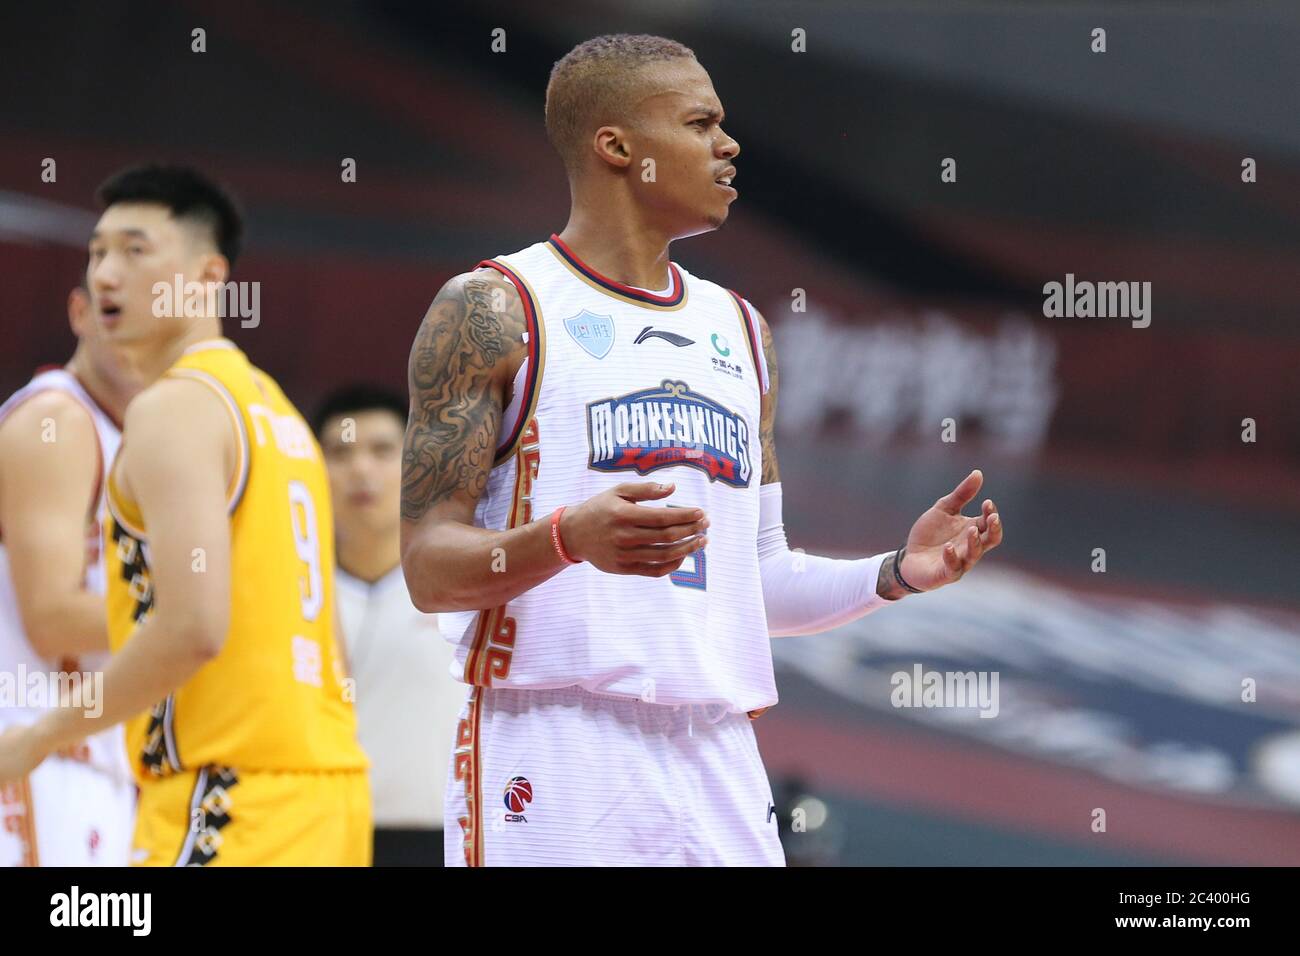 American professional basketball player Joseph Michael Young of Nanjing  Tongxi Monkey King, right, reacts during a game at the first stage of  Chinese Basketball Association (CBA) resumption against Zhejiang Guangsha  Lions, Qingdao